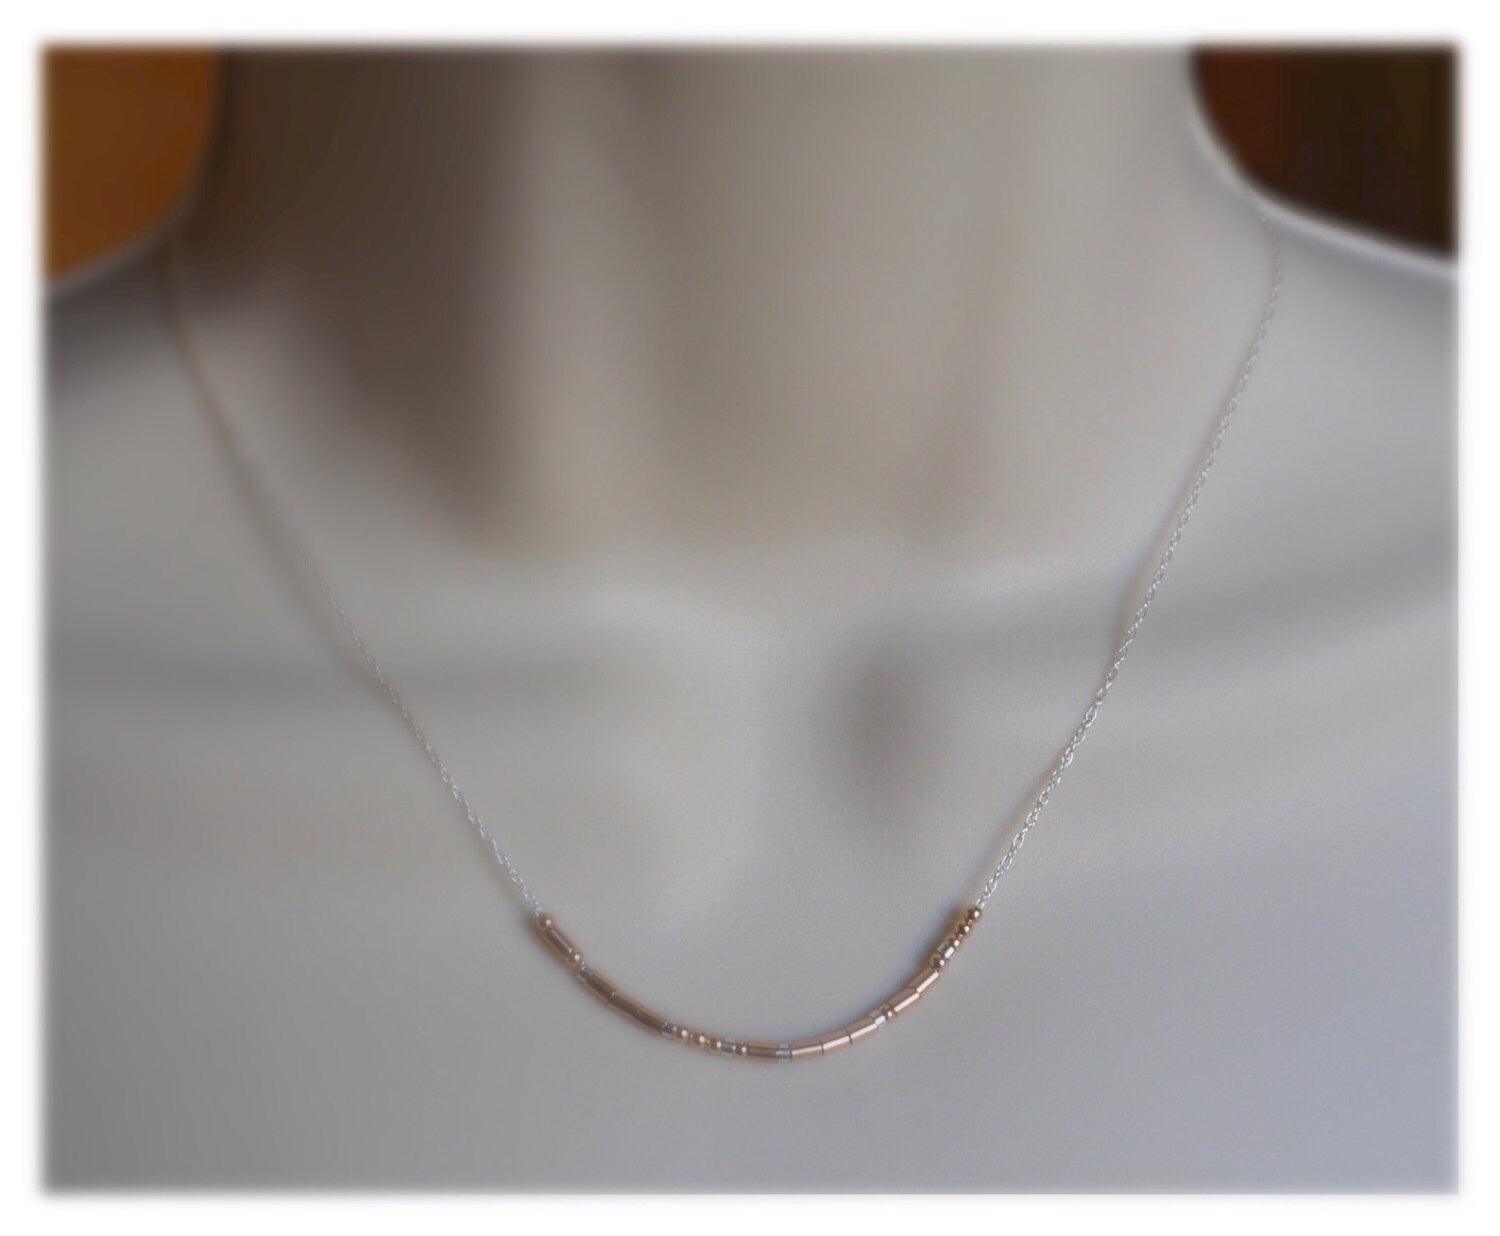 Loved Morse Code Necklace • AX.YS.RW.S1.S - Morse and Dainty